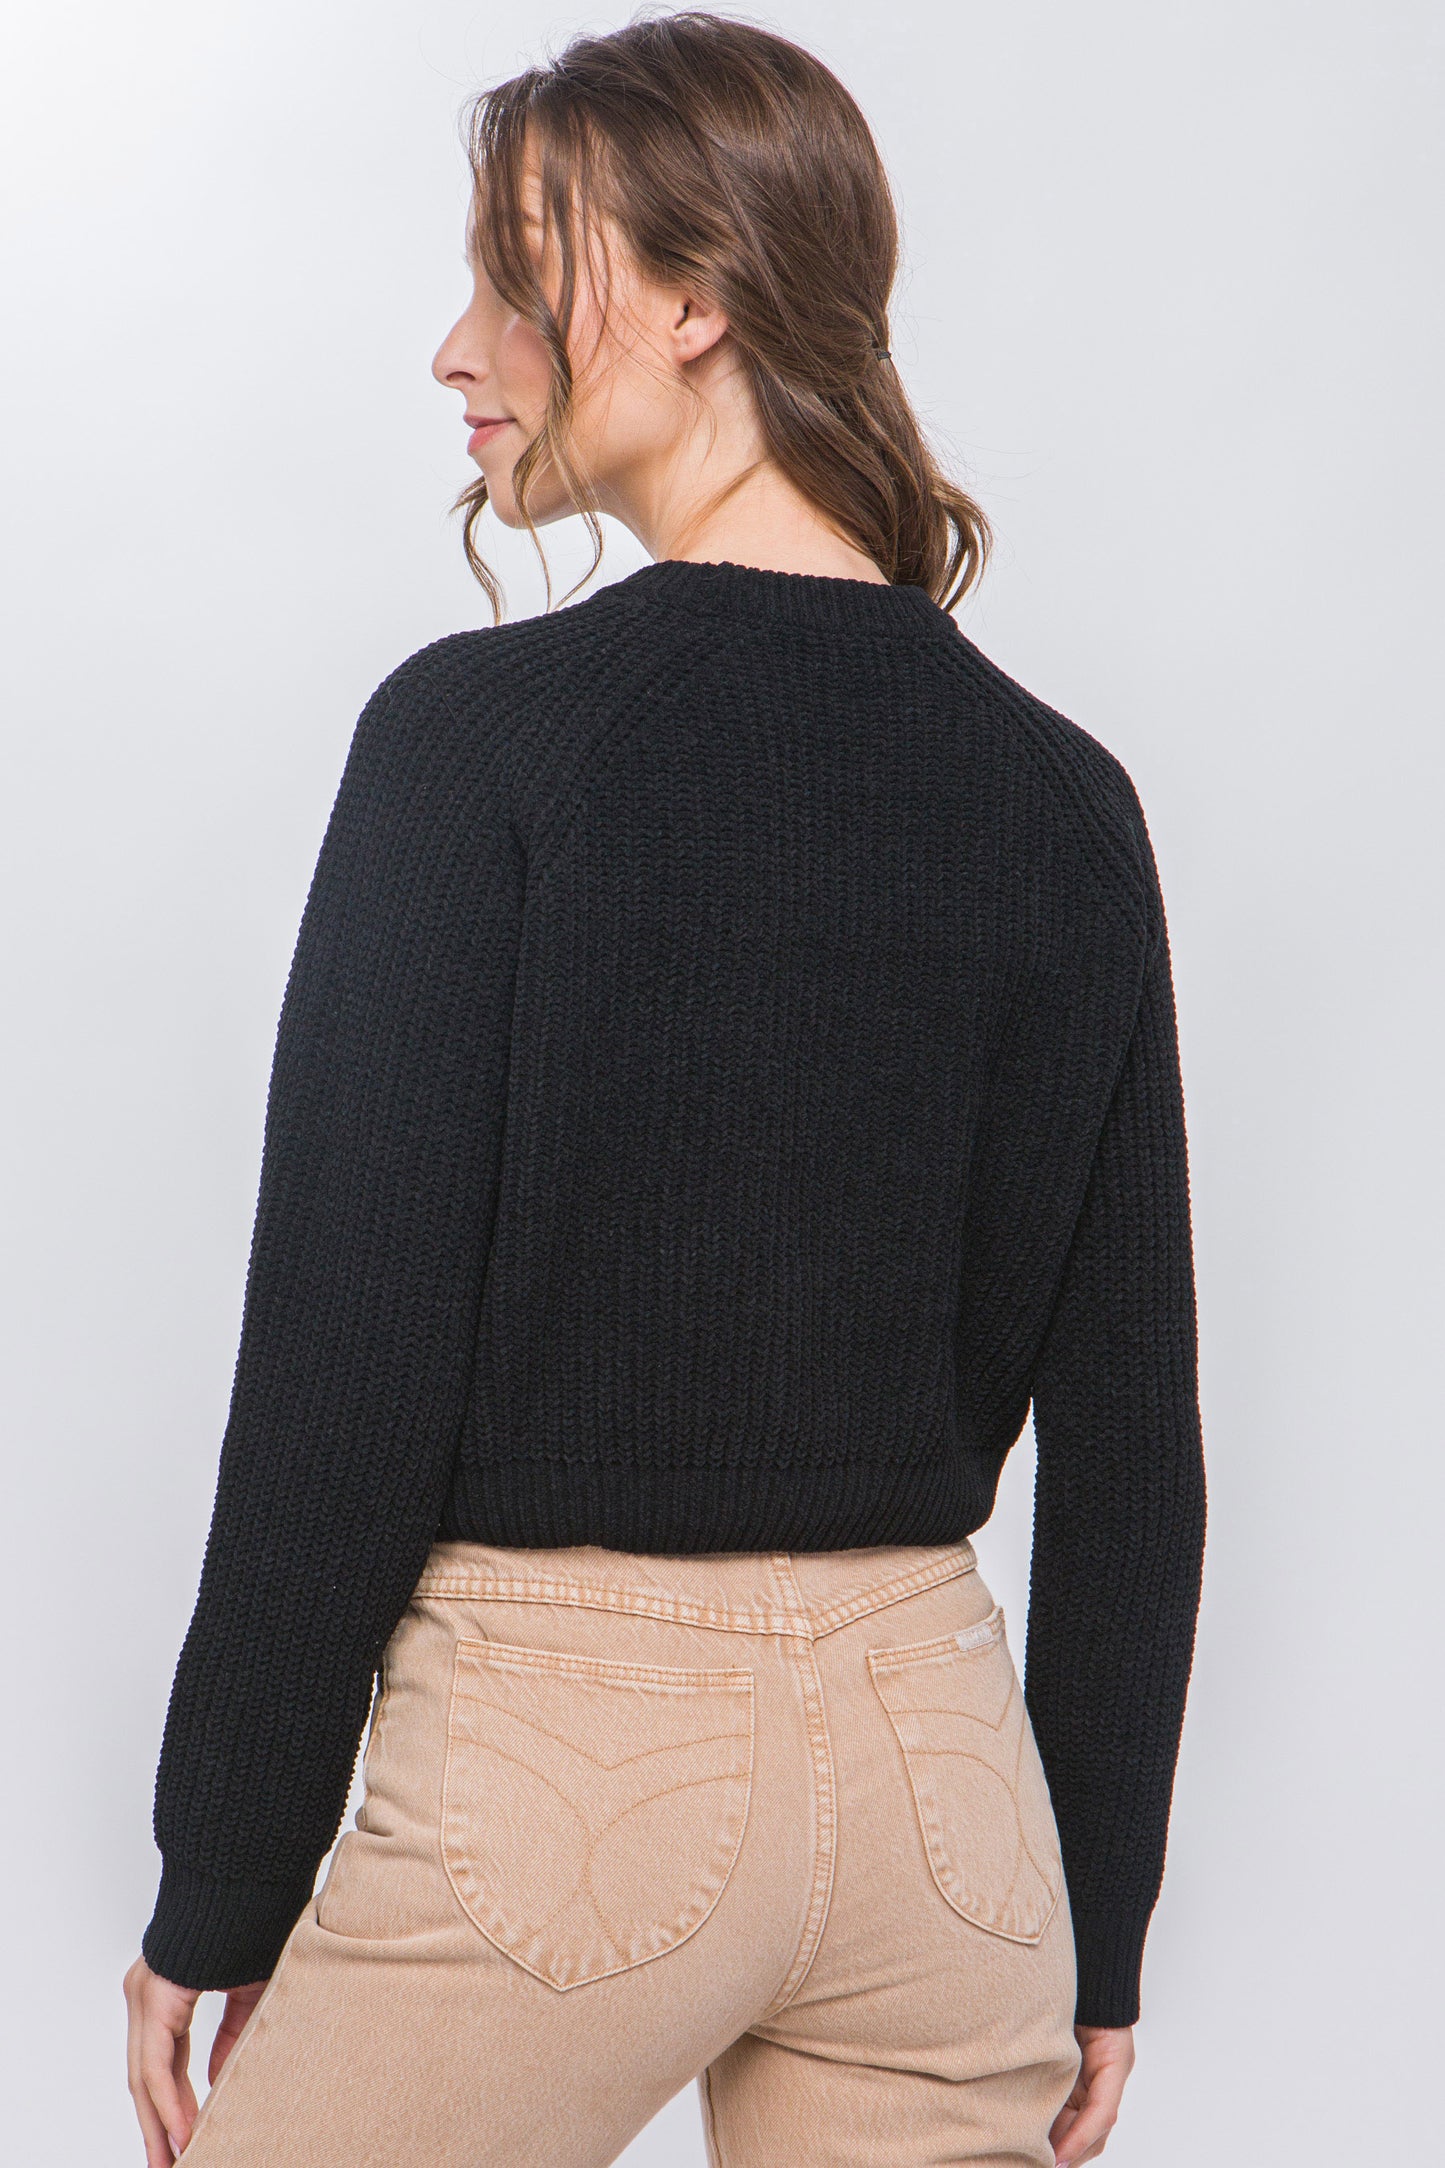 Knit Pullover Sweater With Cold Shoulder Detail - House of Binx 